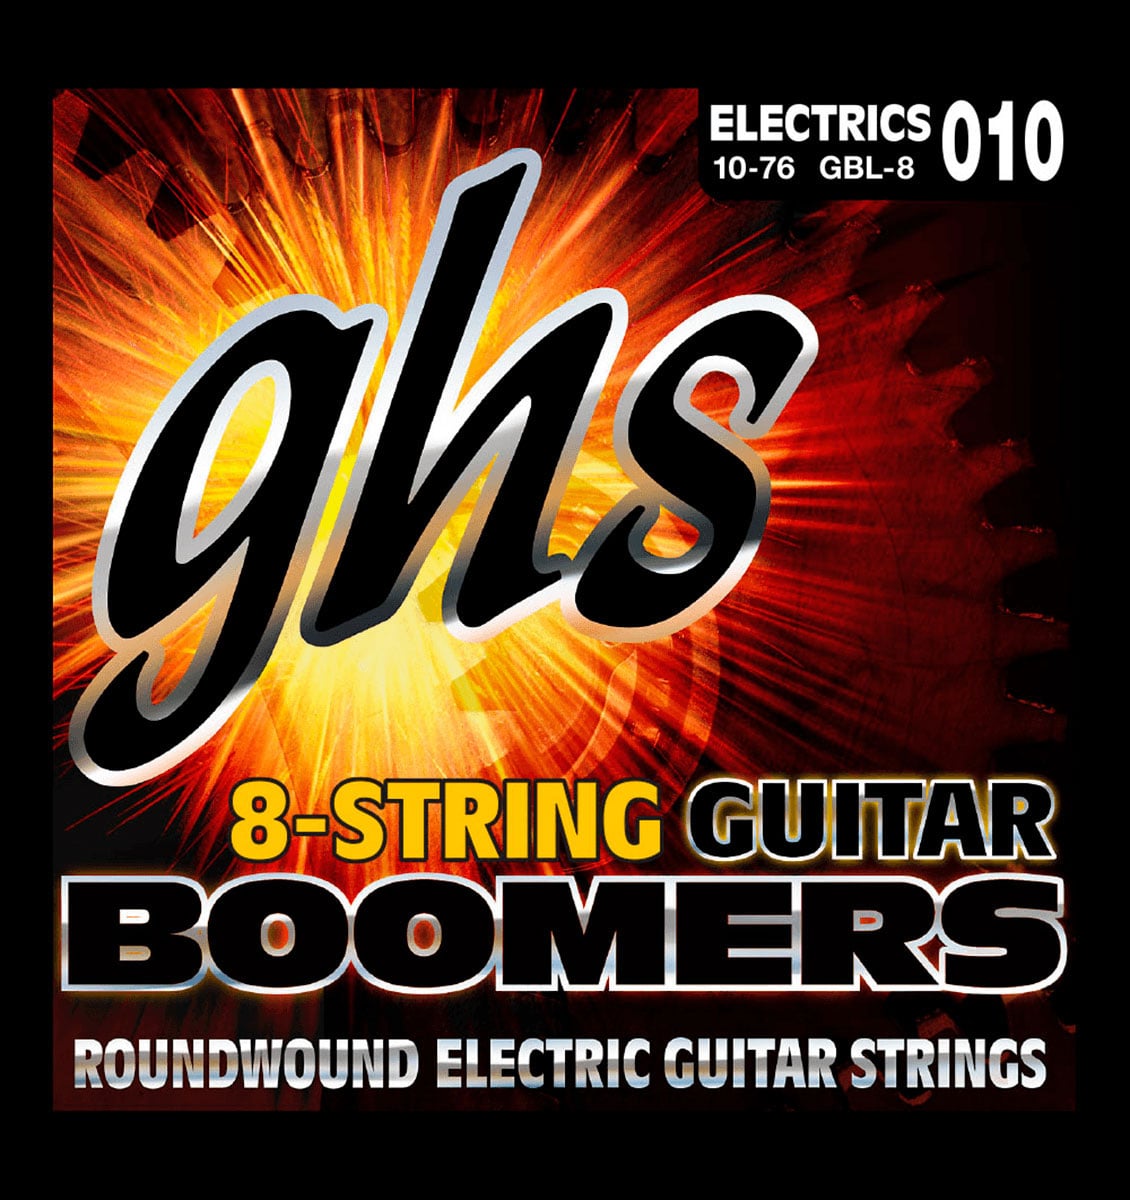 GHS GBL-8 BOOMERS LIGHT 8C 10-76